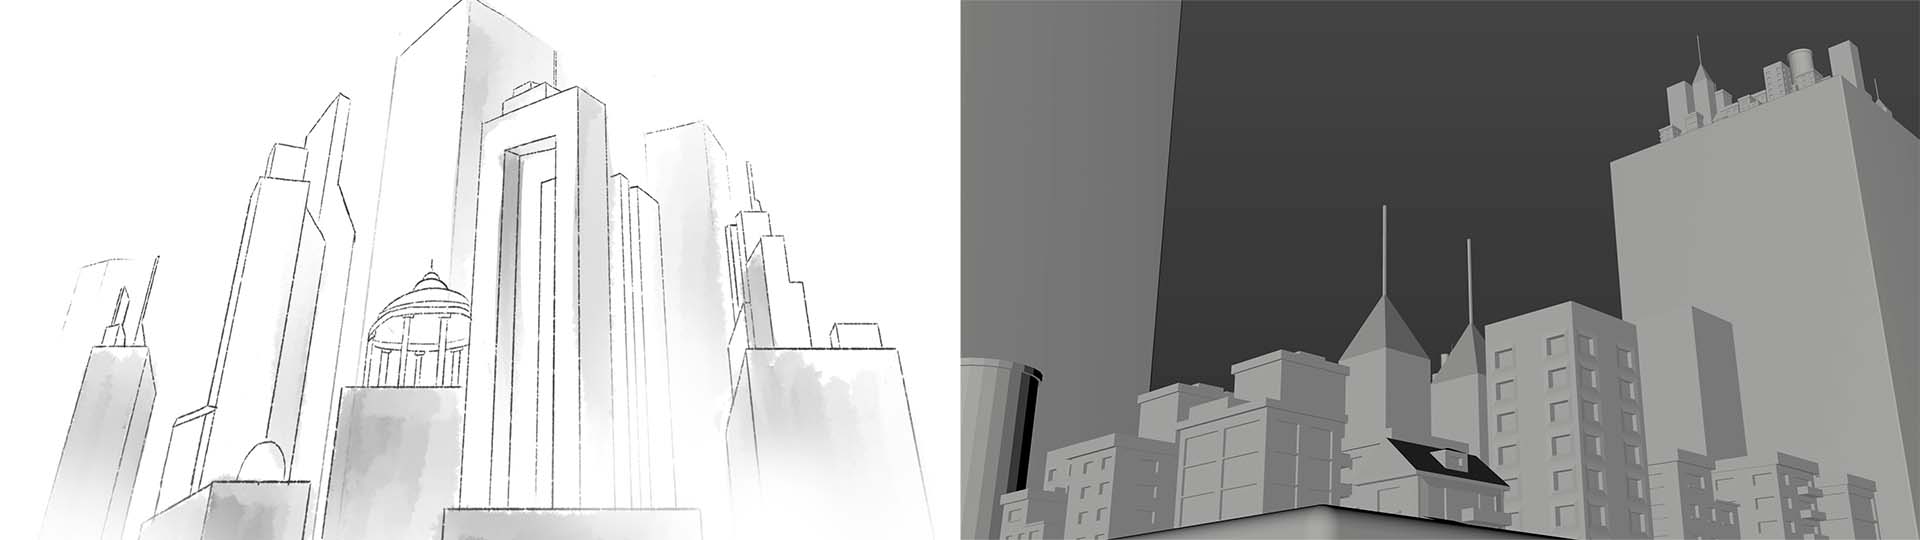 Storyboard sketch for 3d video project